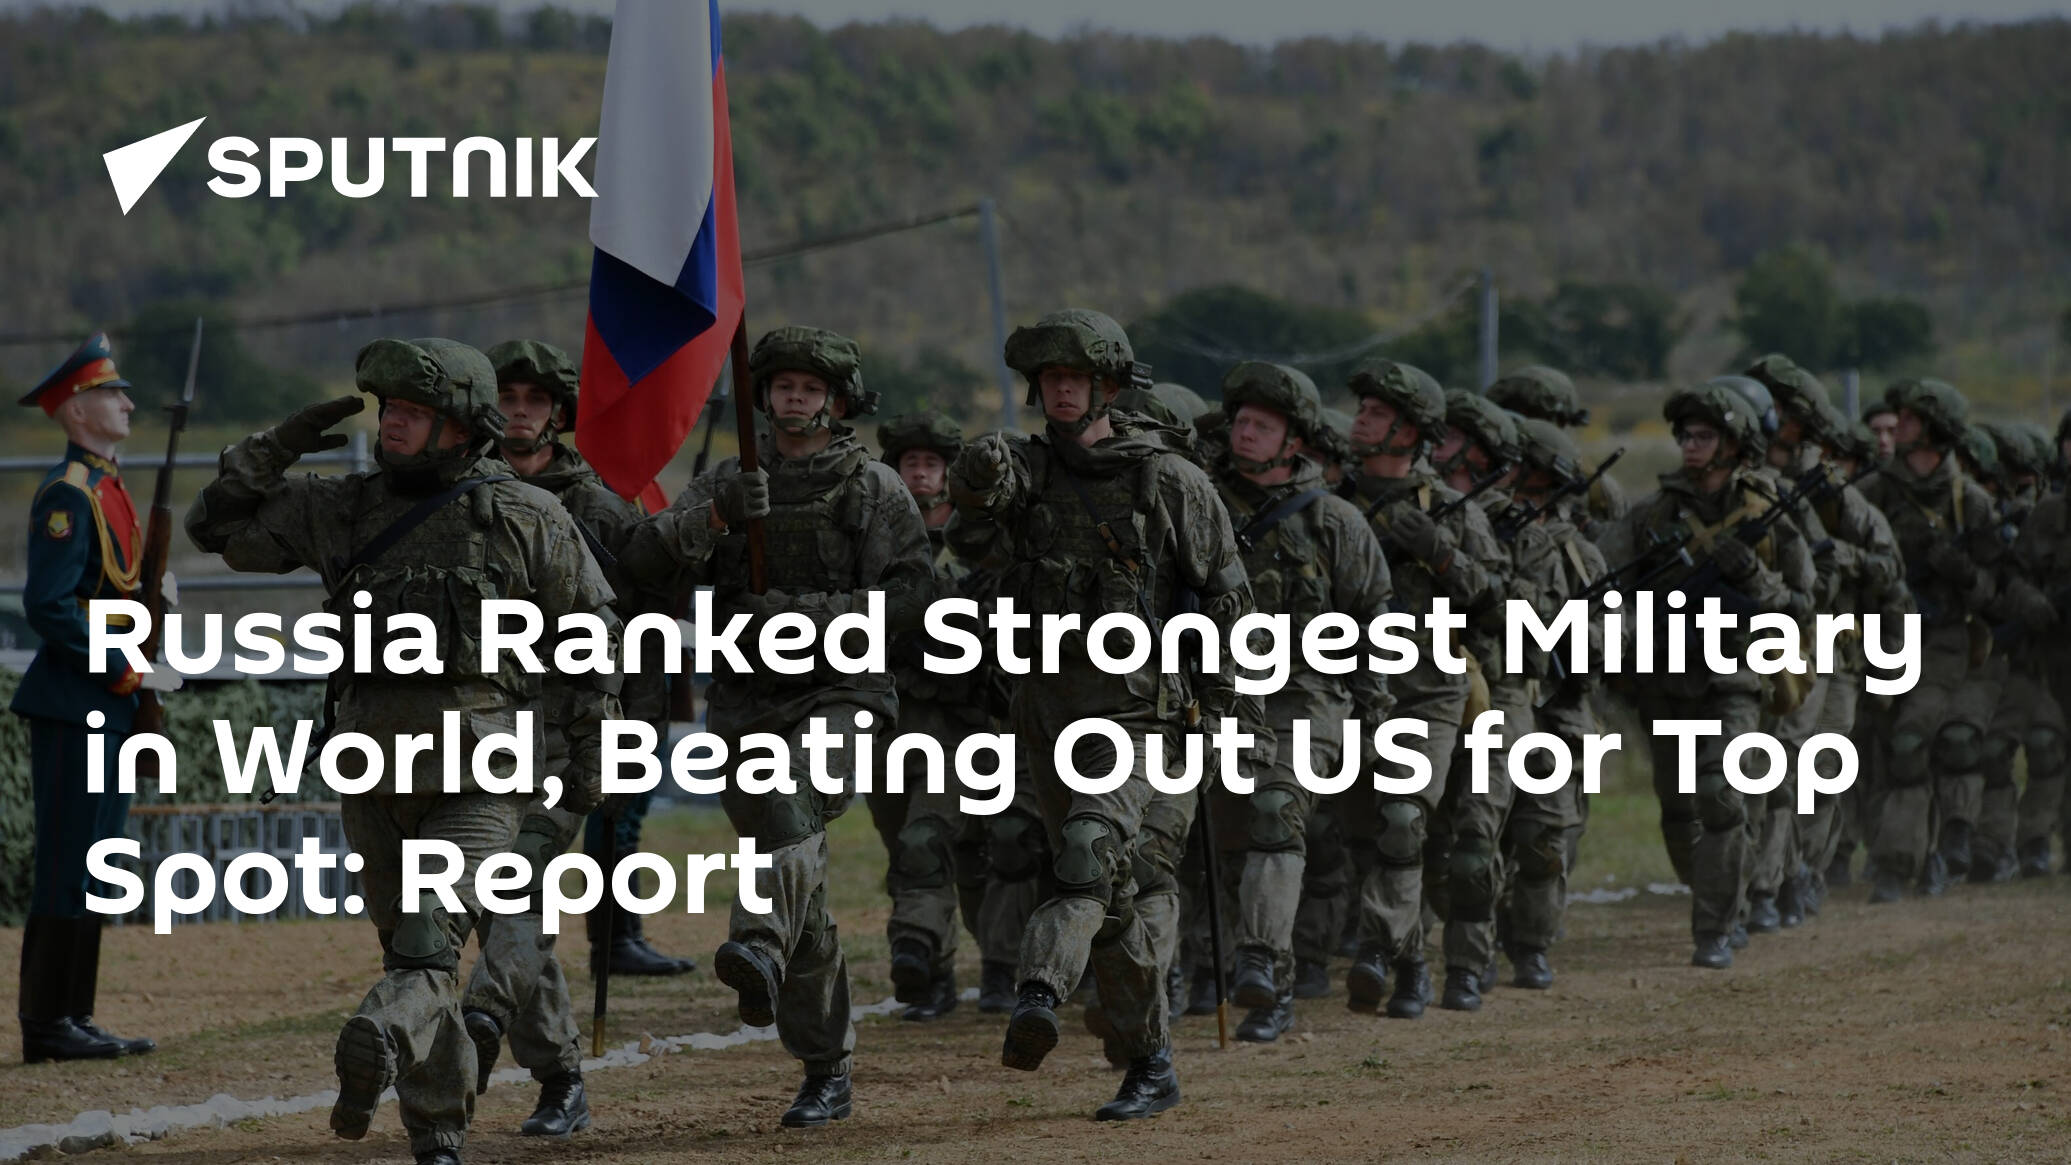 Russia Ranked Strongest Military in World, Beating Out US for Top Spot:  Report - 31.10.2023, Sputnik Africa